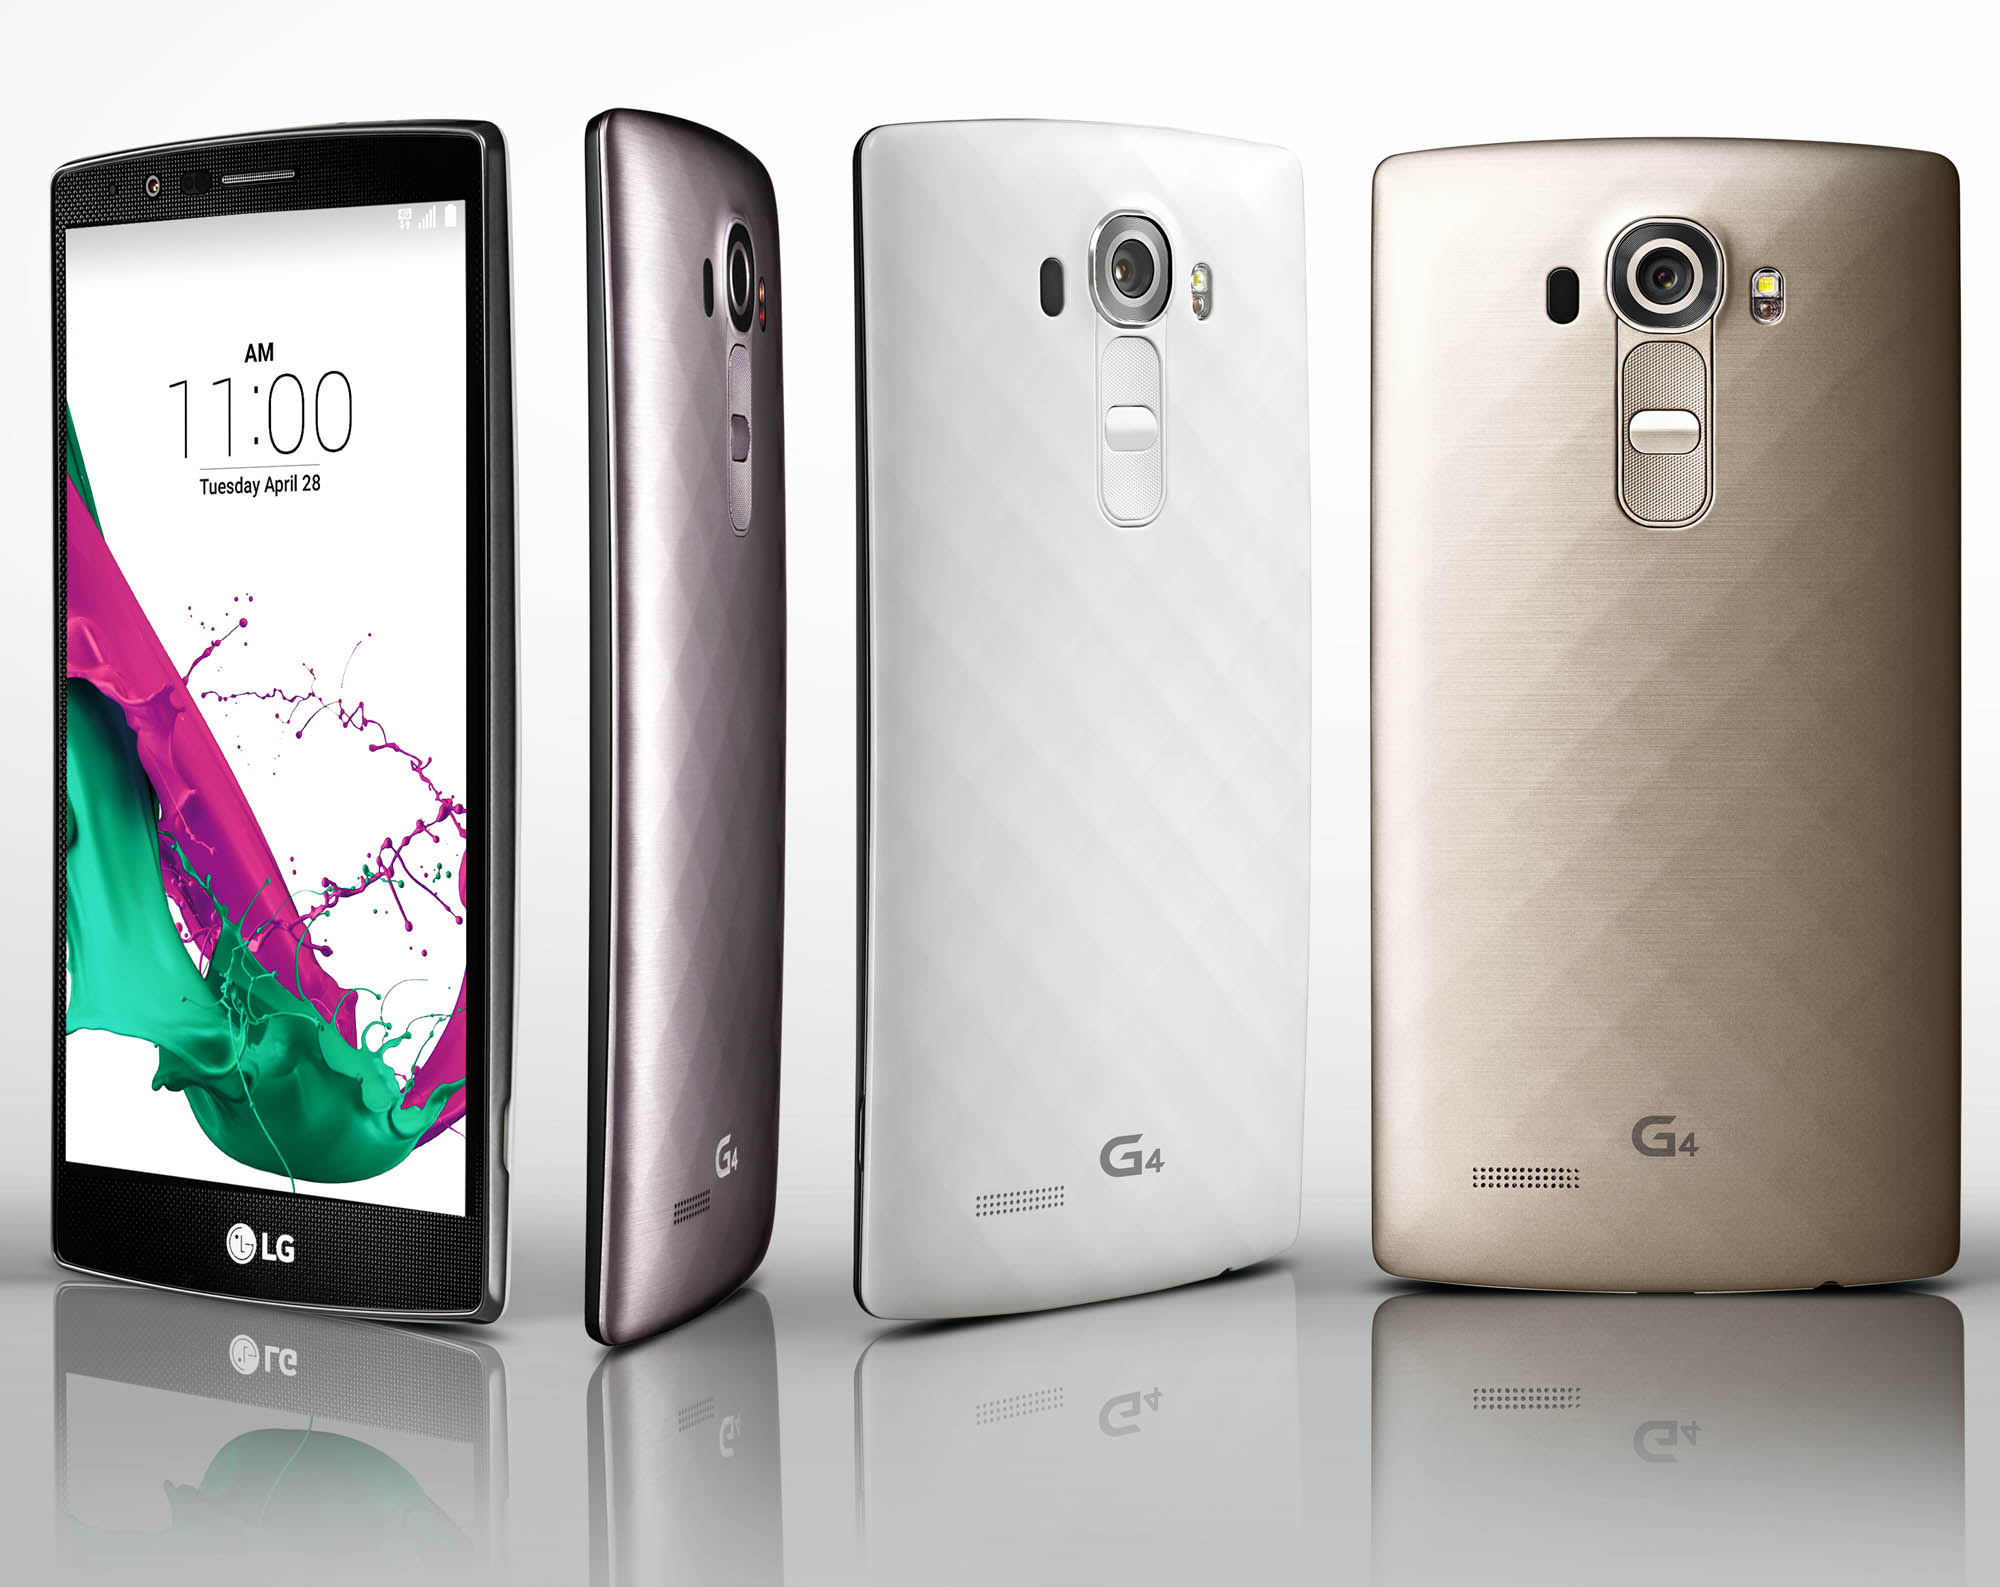 LG G4 is coming to Malaysia